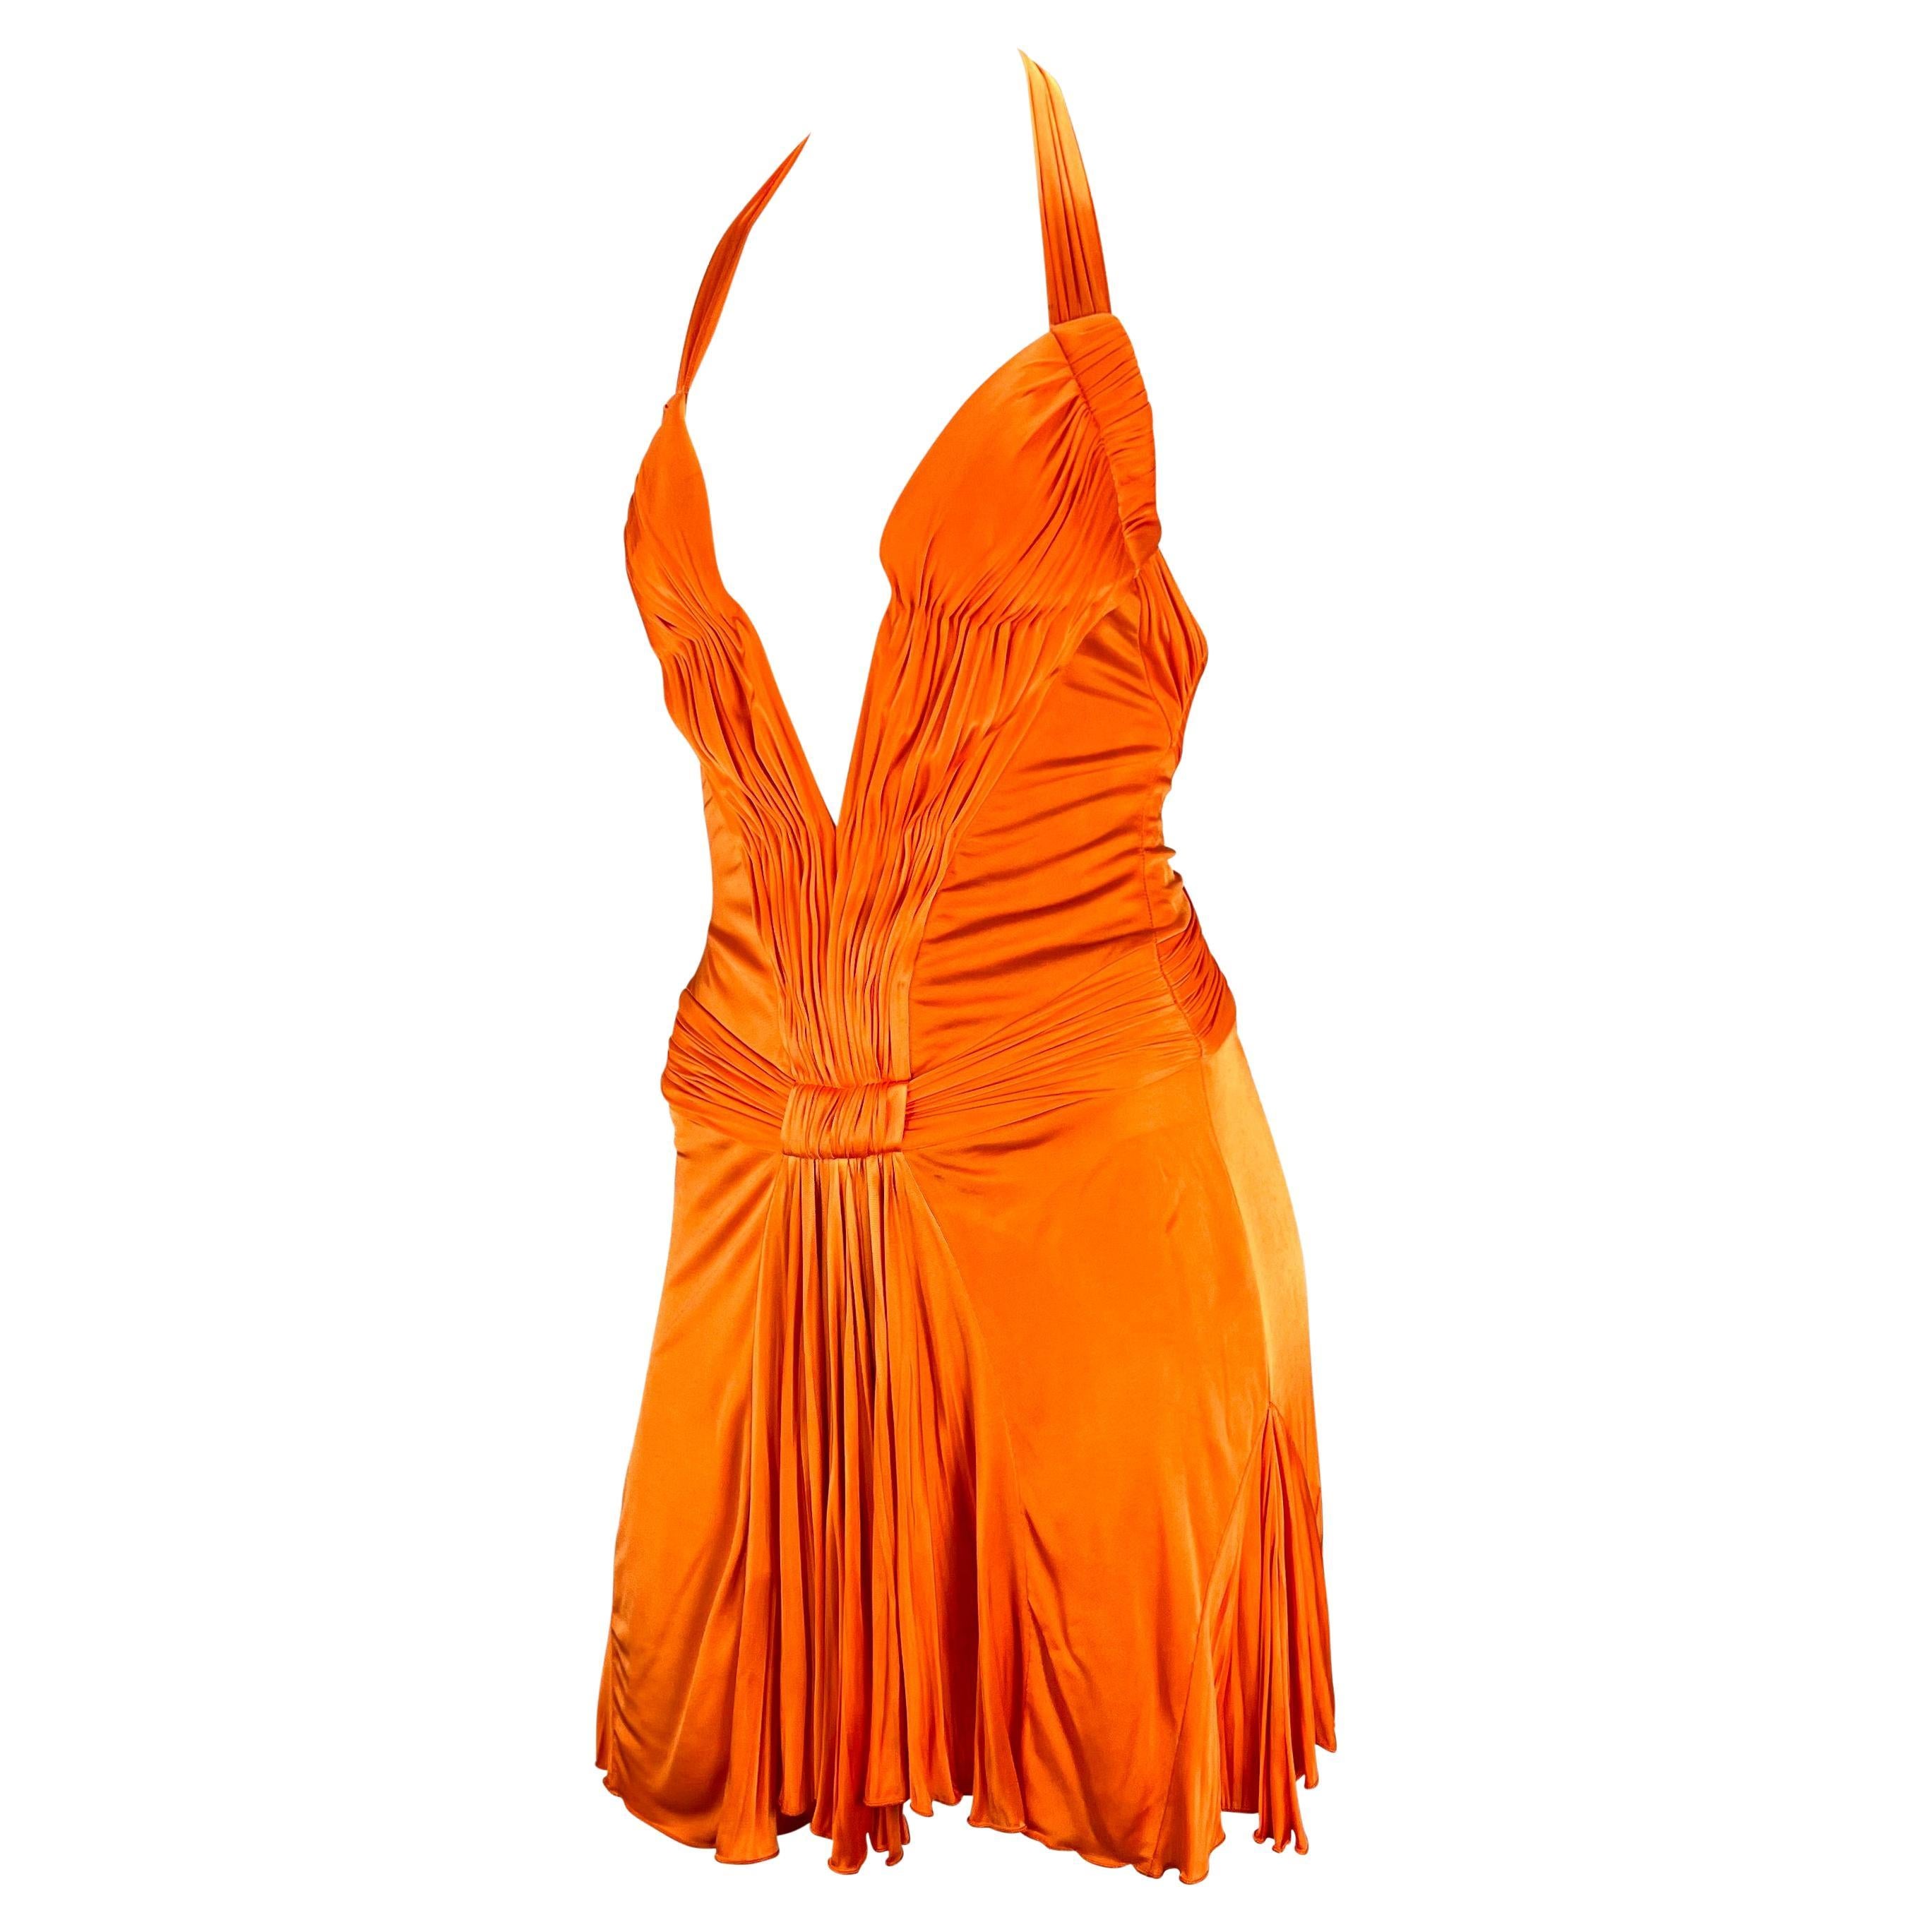 Presenting a bright orange Roberto Cavalli plunging mini dress. From the Spring/Summer 2005 collection, this beautiful and lively dress features a rigid deep plunging neckline, semi-exposed back, and ruching details. Absolutely stunning, this